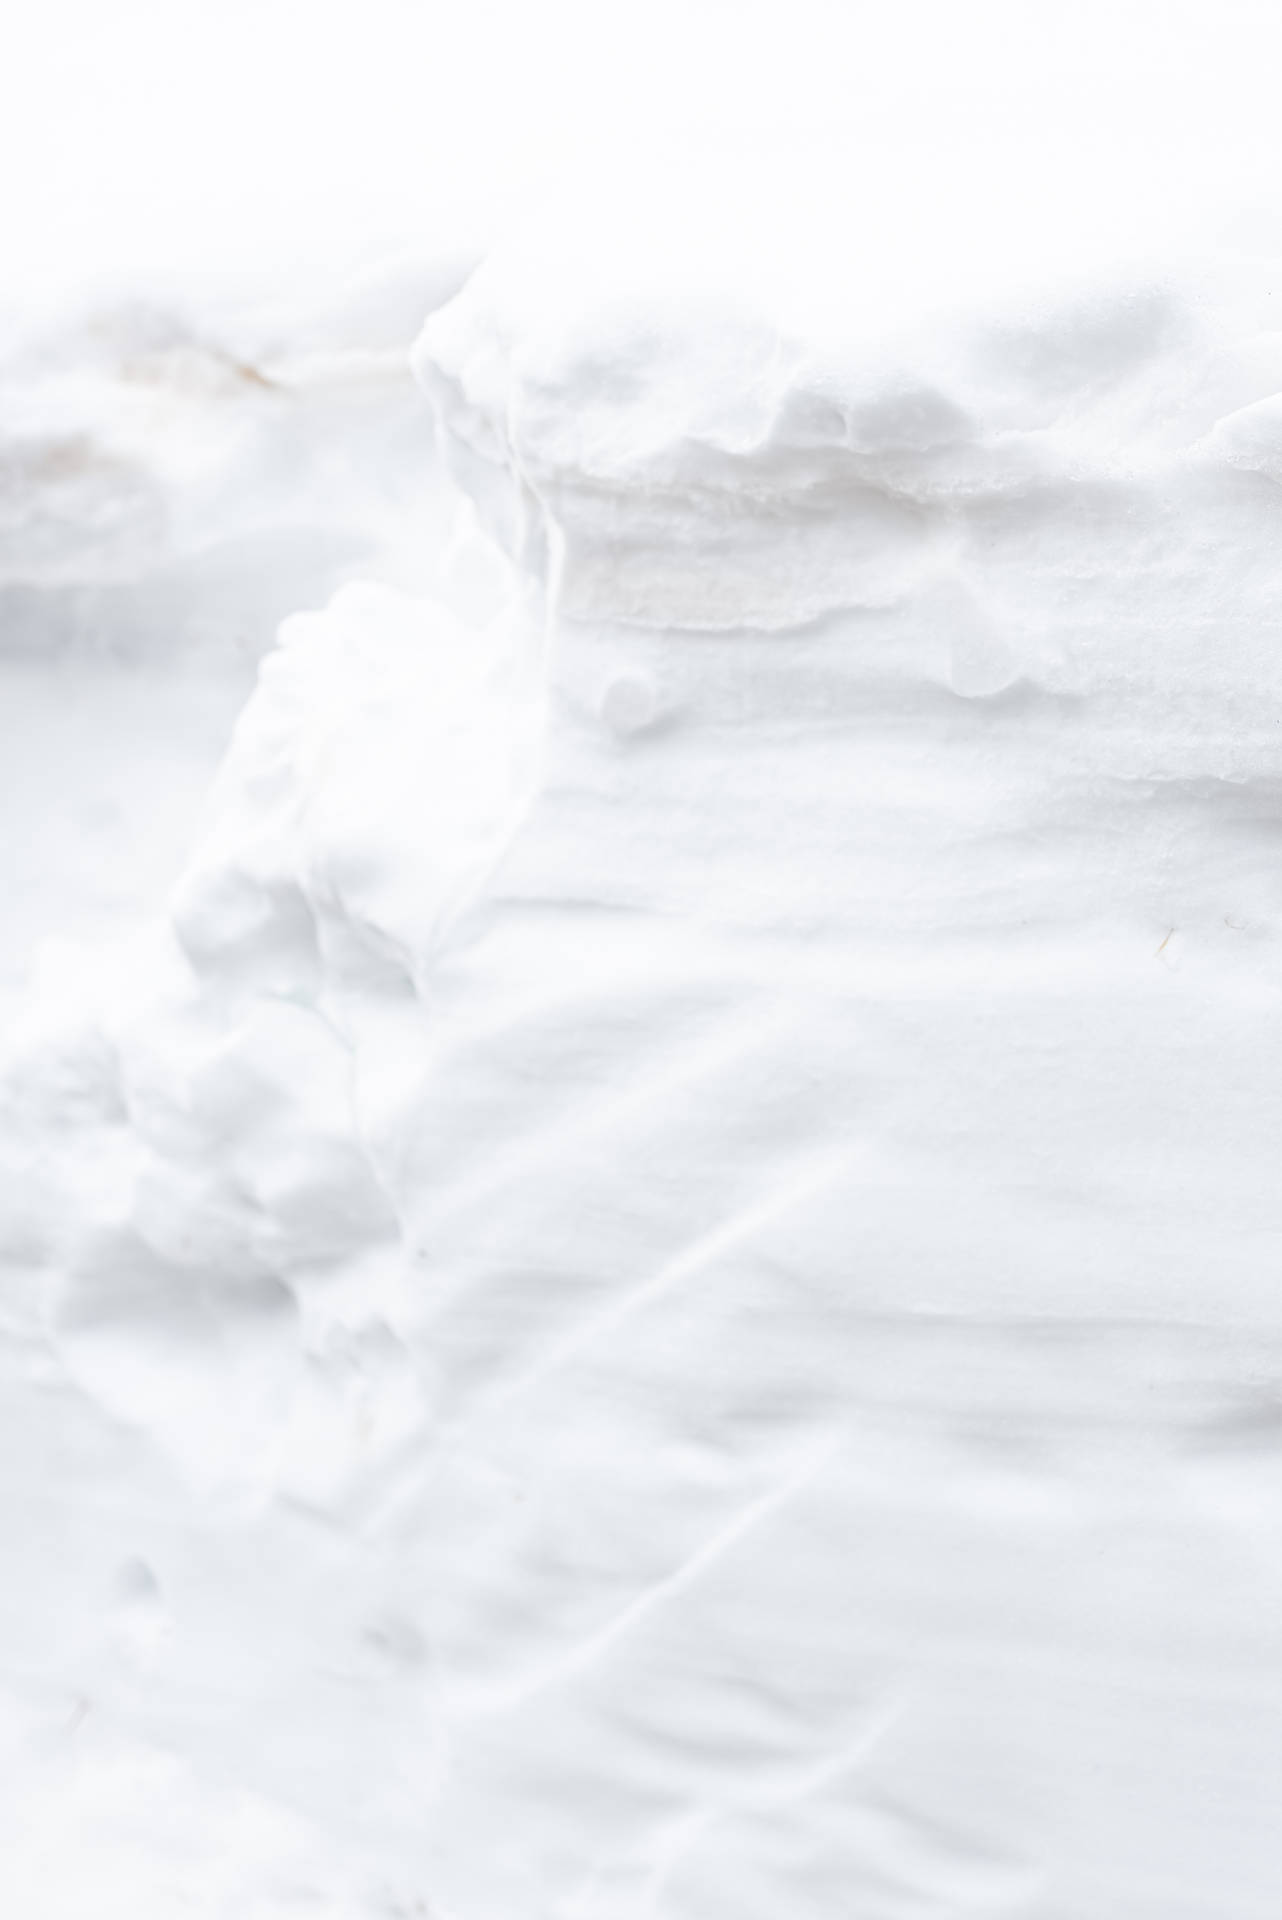 White Aesthetic 3543X5307 Wallpaper and Background Image